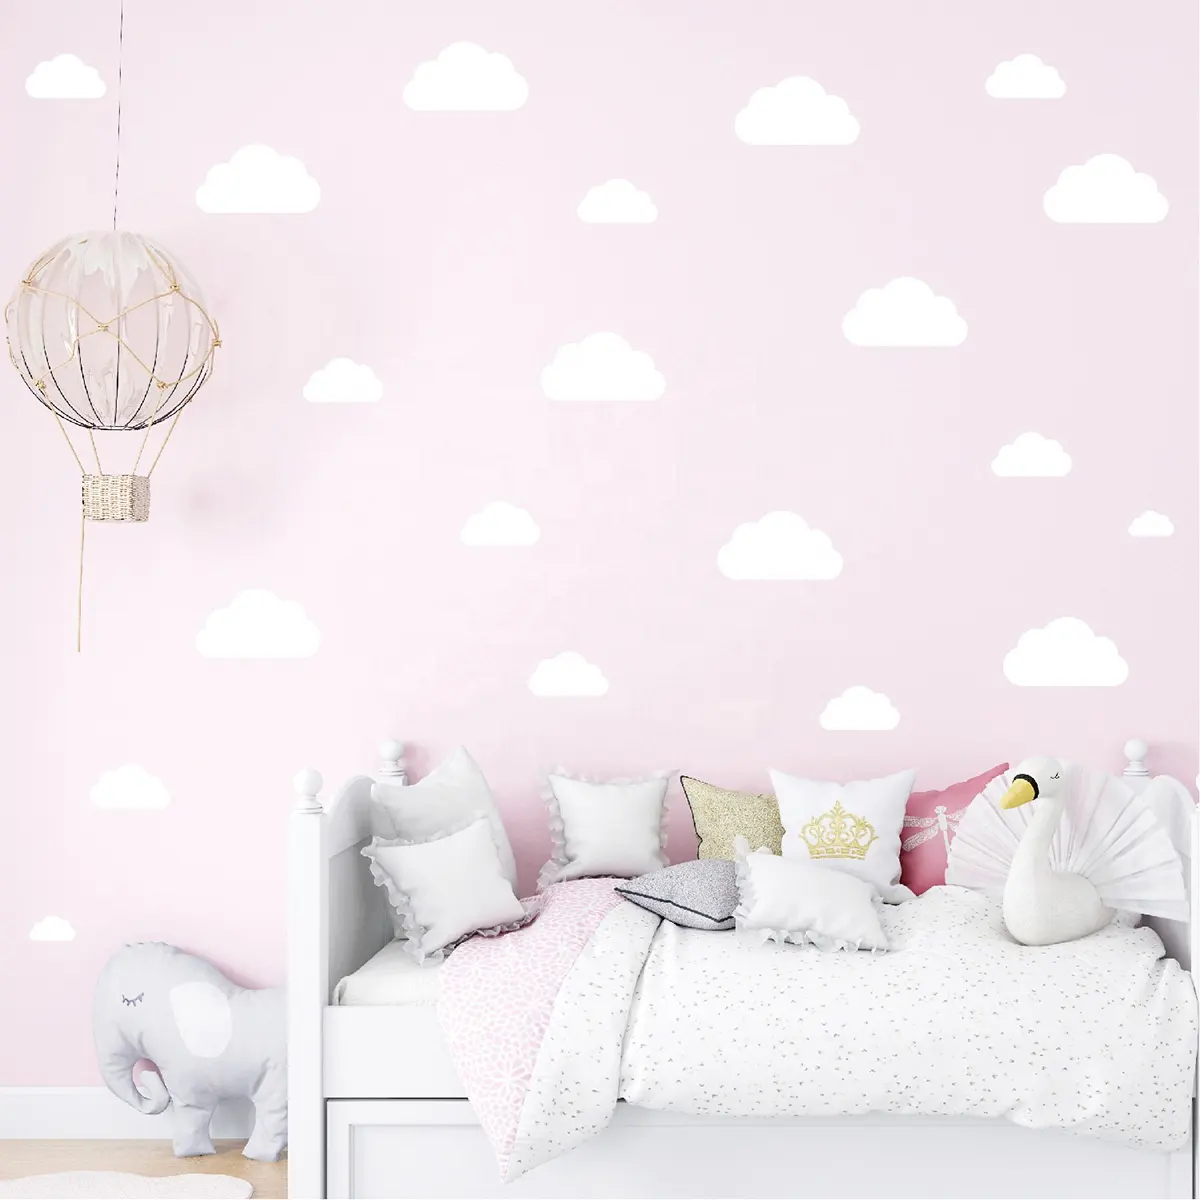 New Cloud Wall Decal White Home Decoration Boys and Girls Sky Living Room Nursery Children's Room home decoration wall sticker